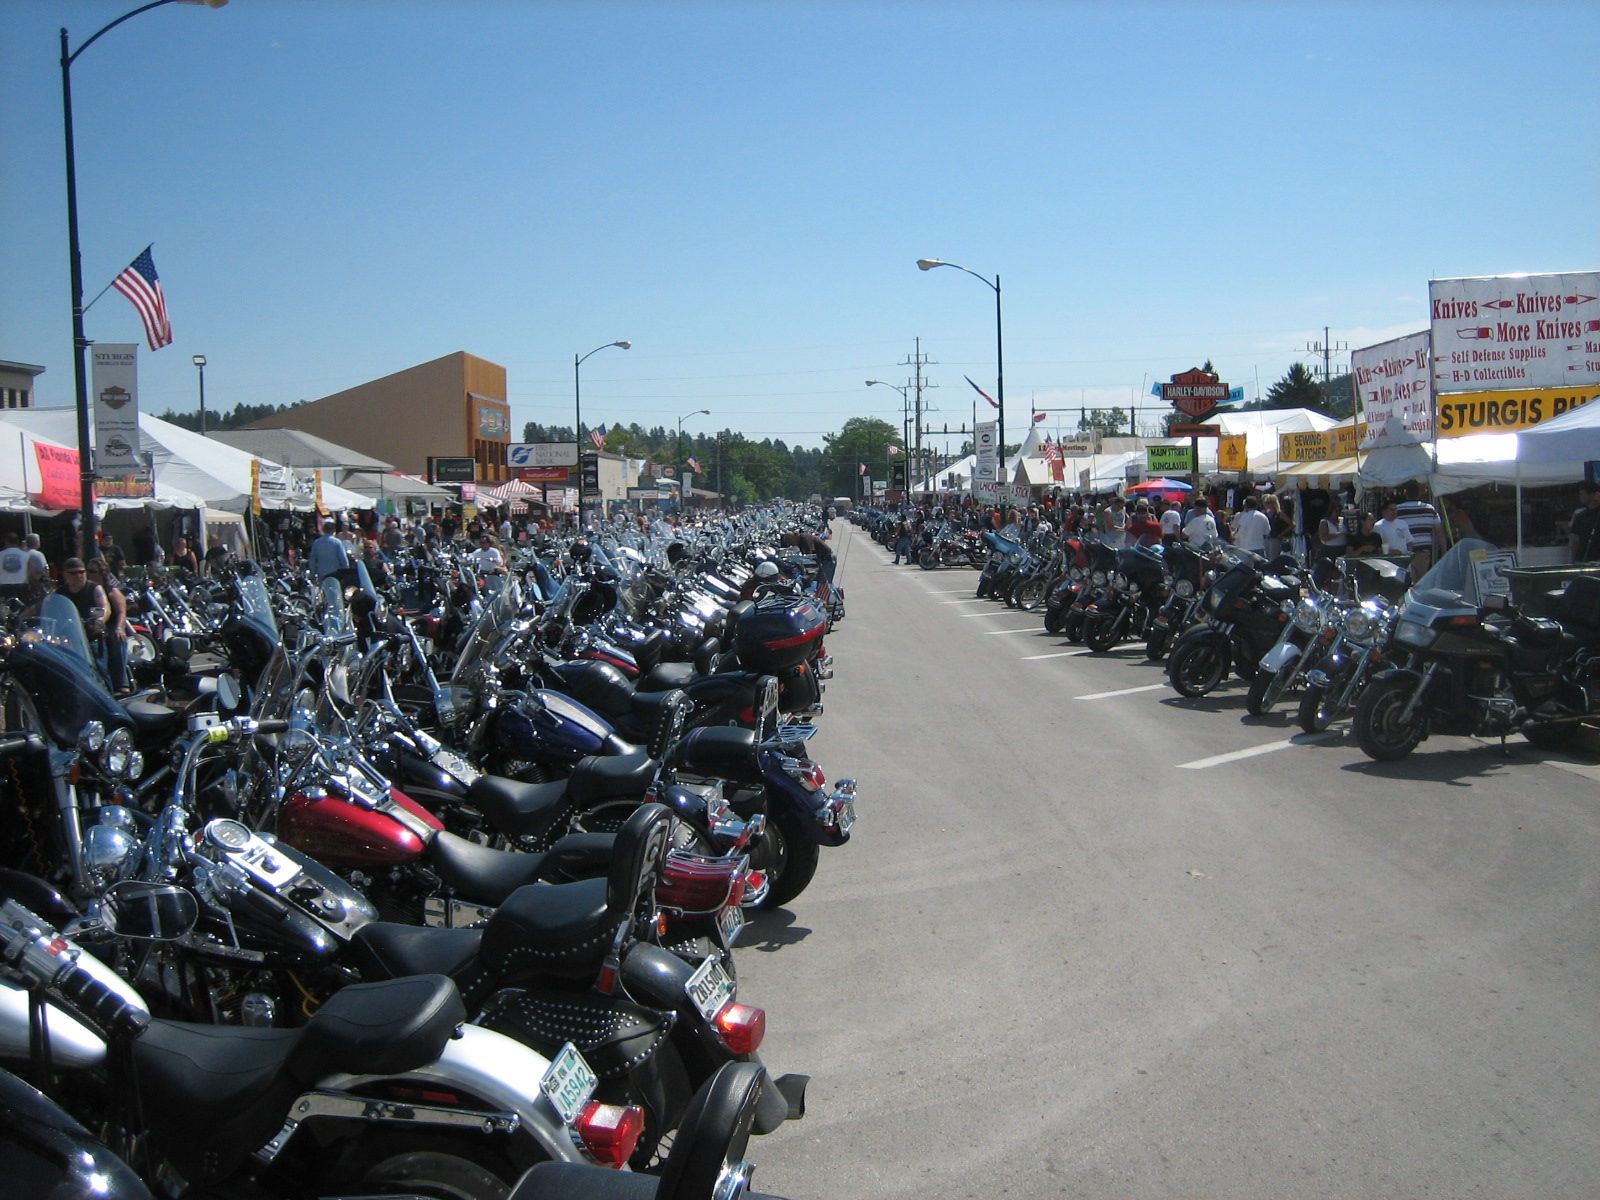 Sturgis bike week pictures dowload 3d hd pictures.